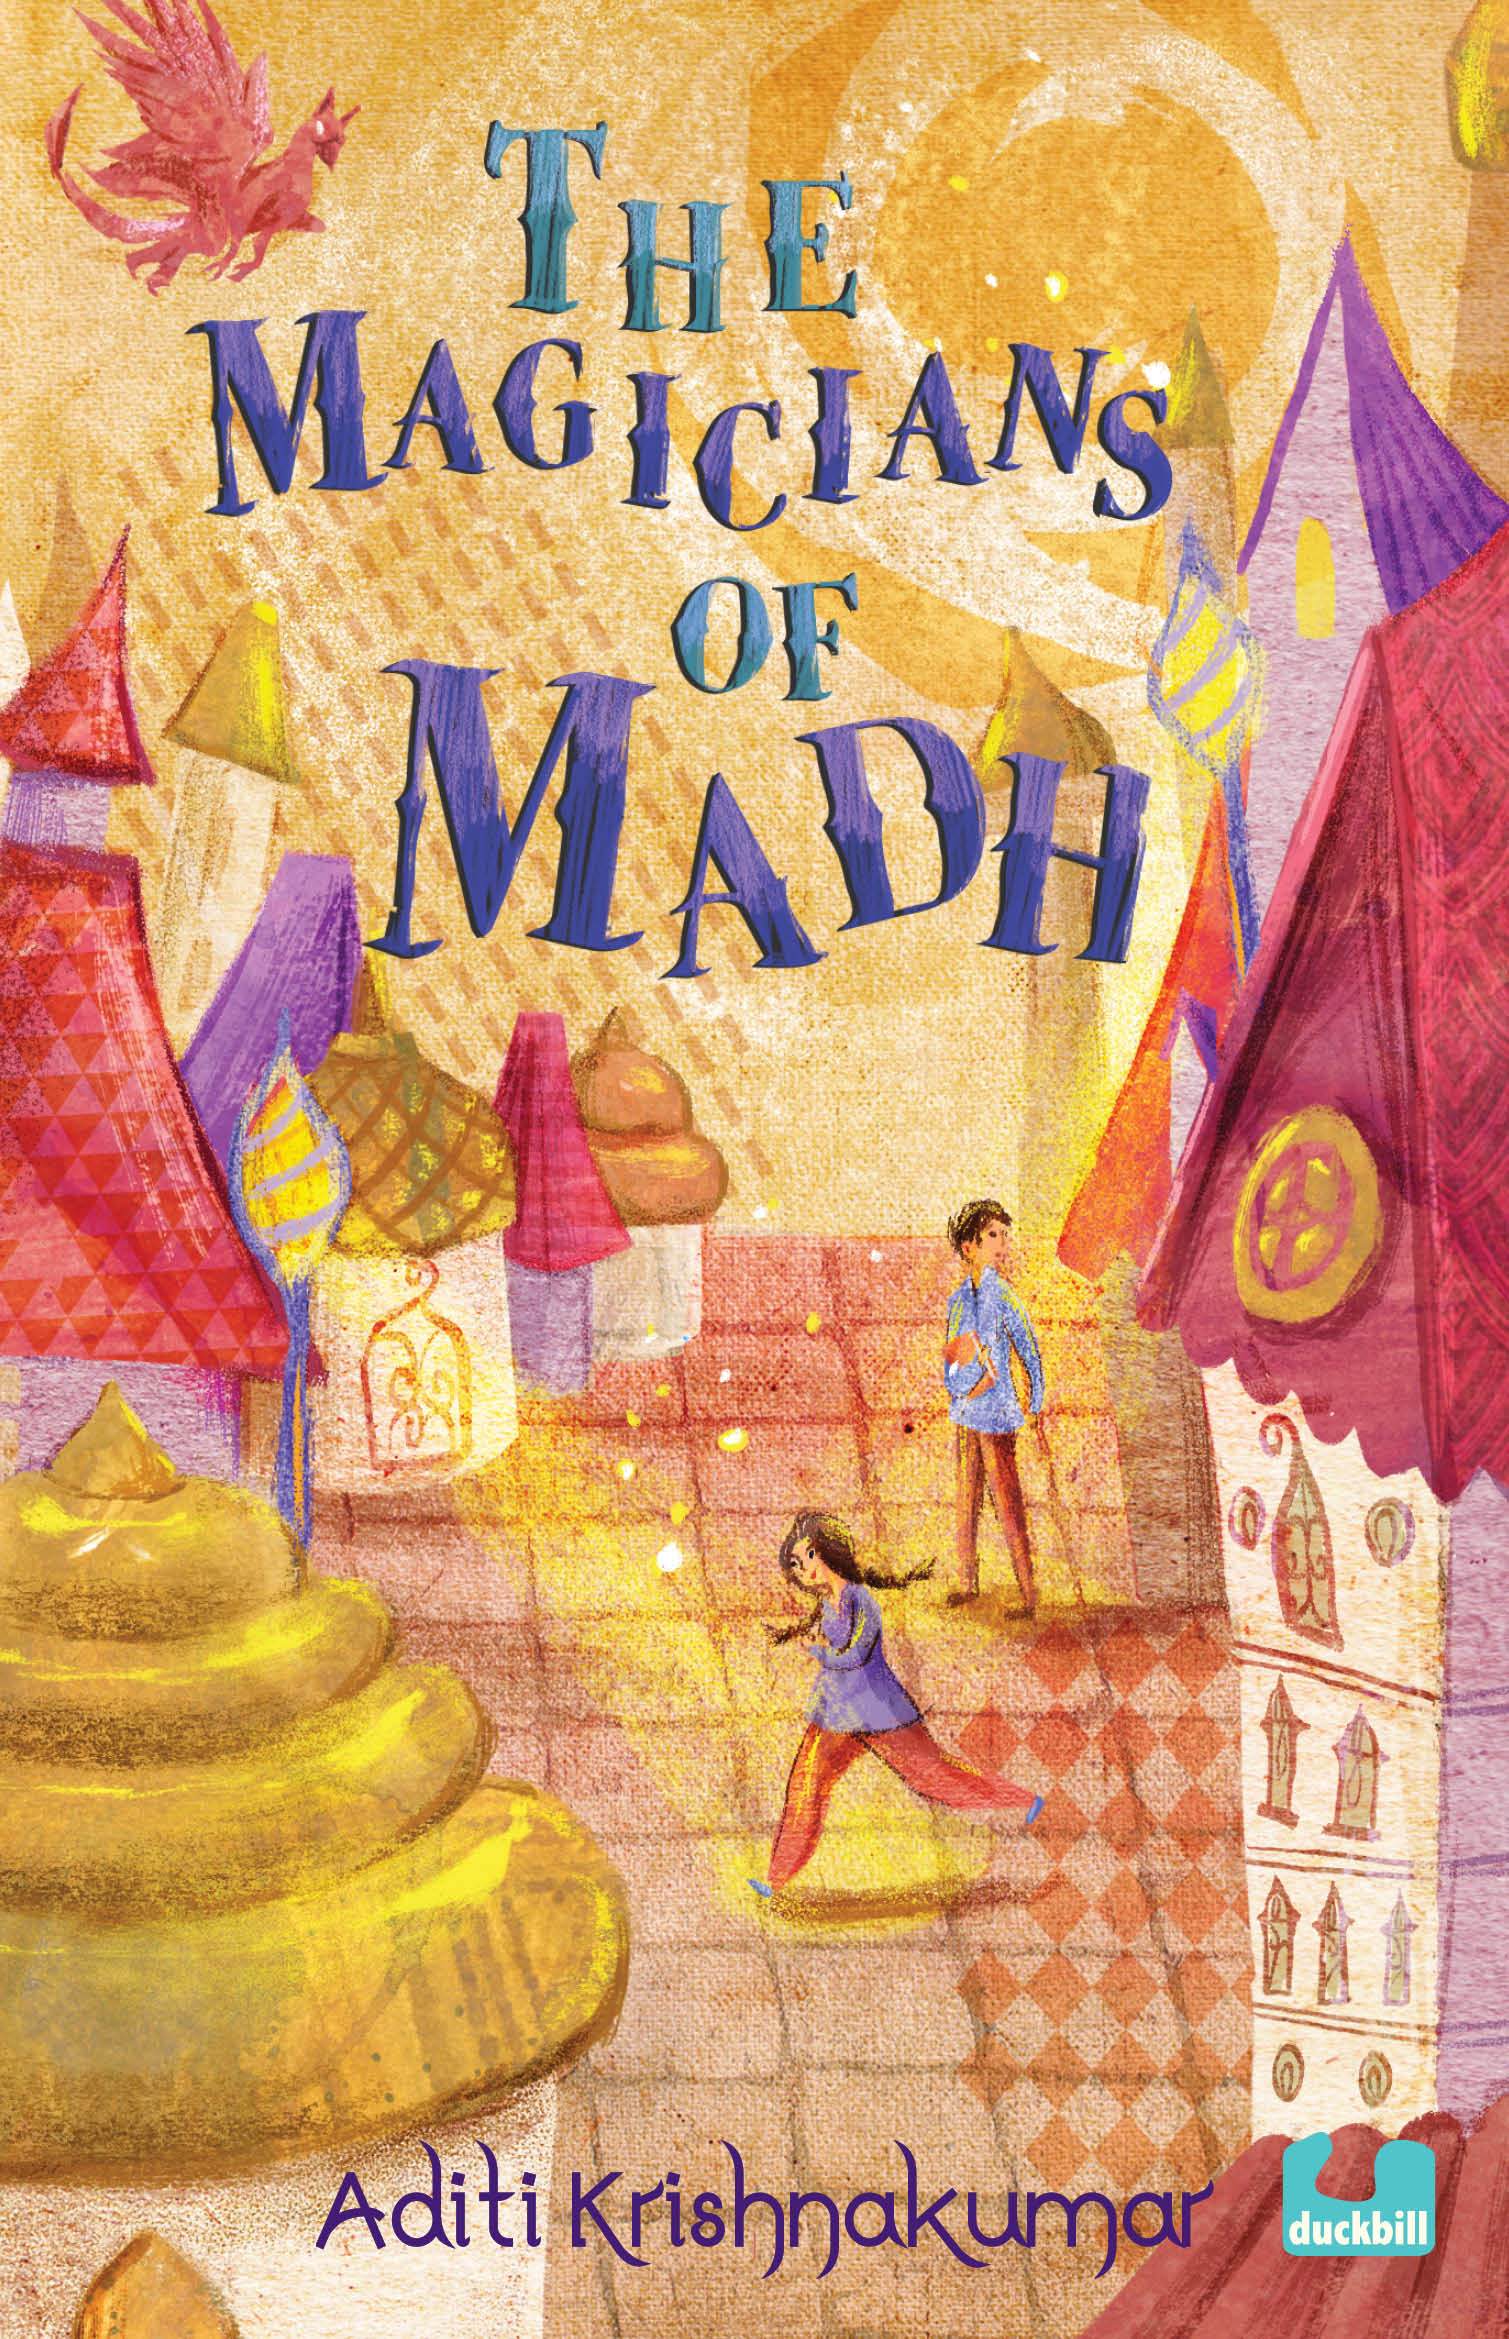 You are currently viewing The Magicians of Madh delves into some delightful fantasy fiction